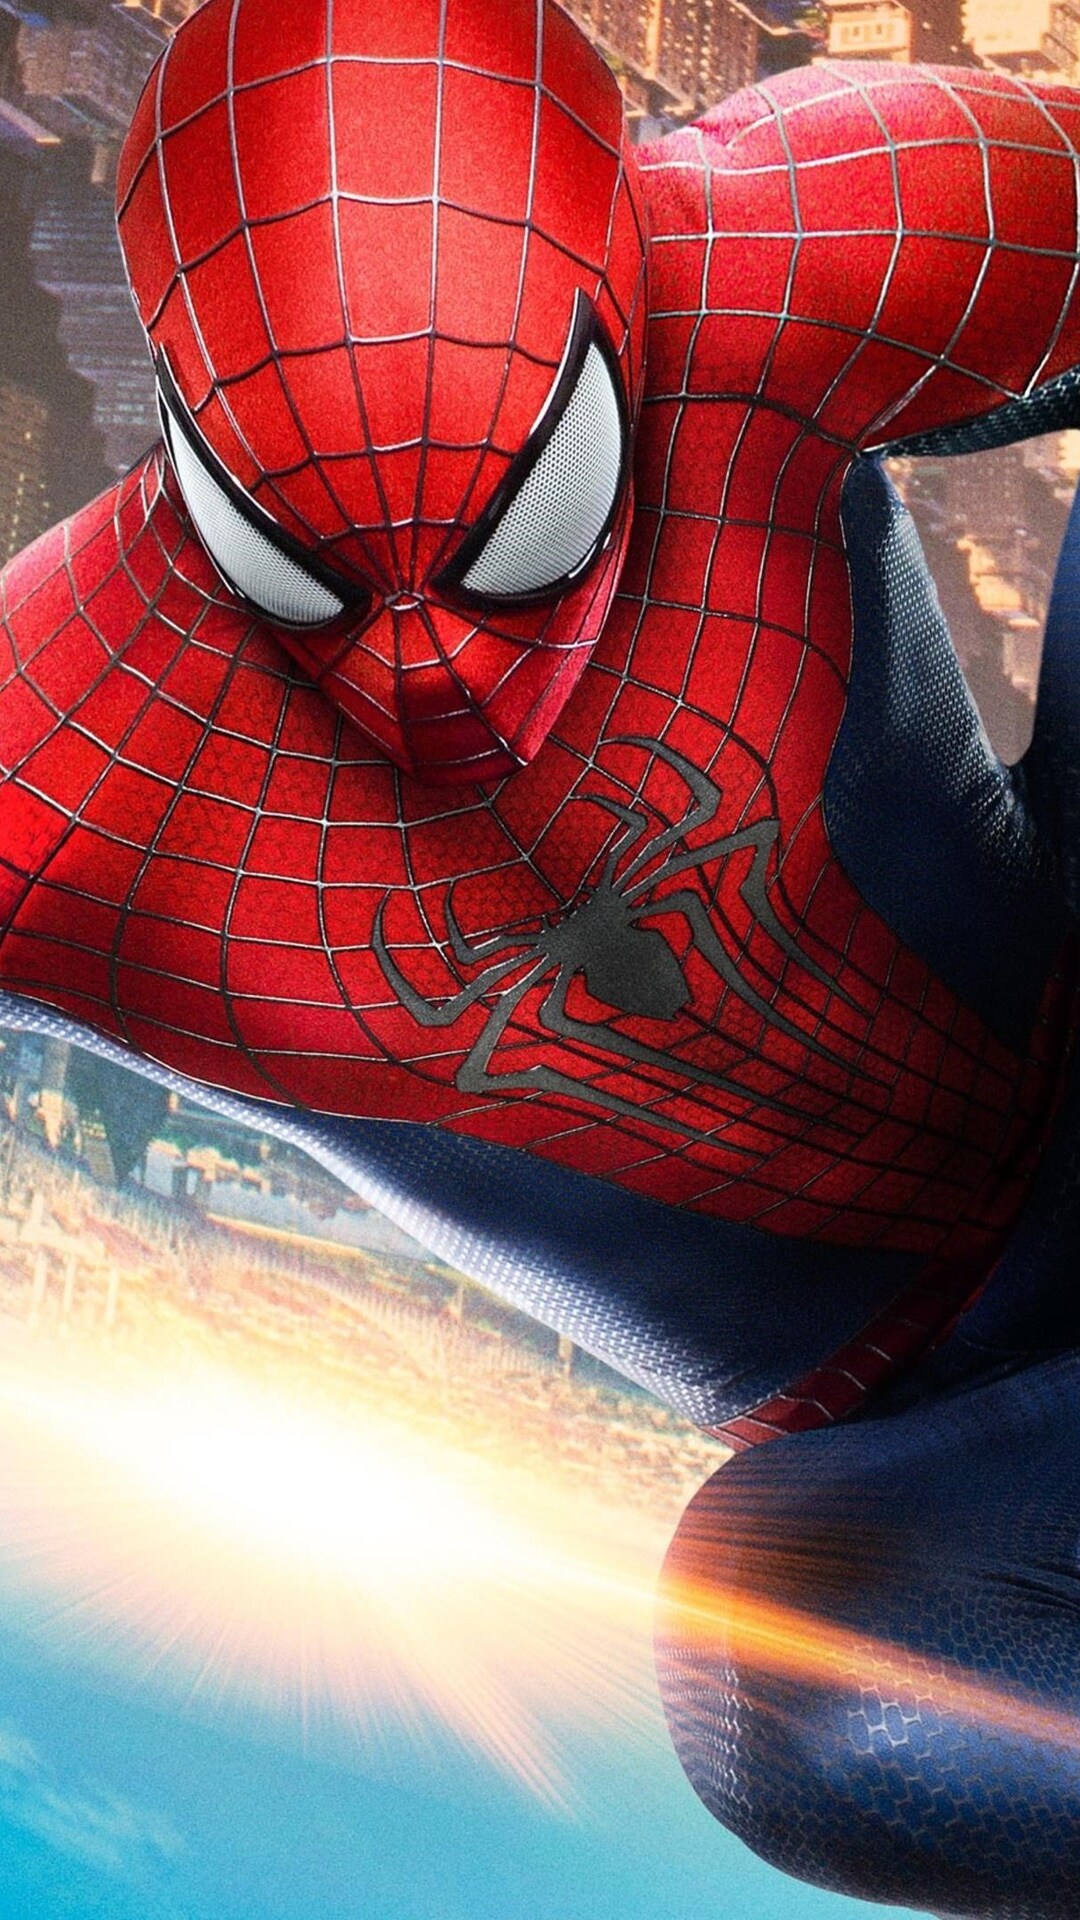 Spider-Man 2 Wallpapers